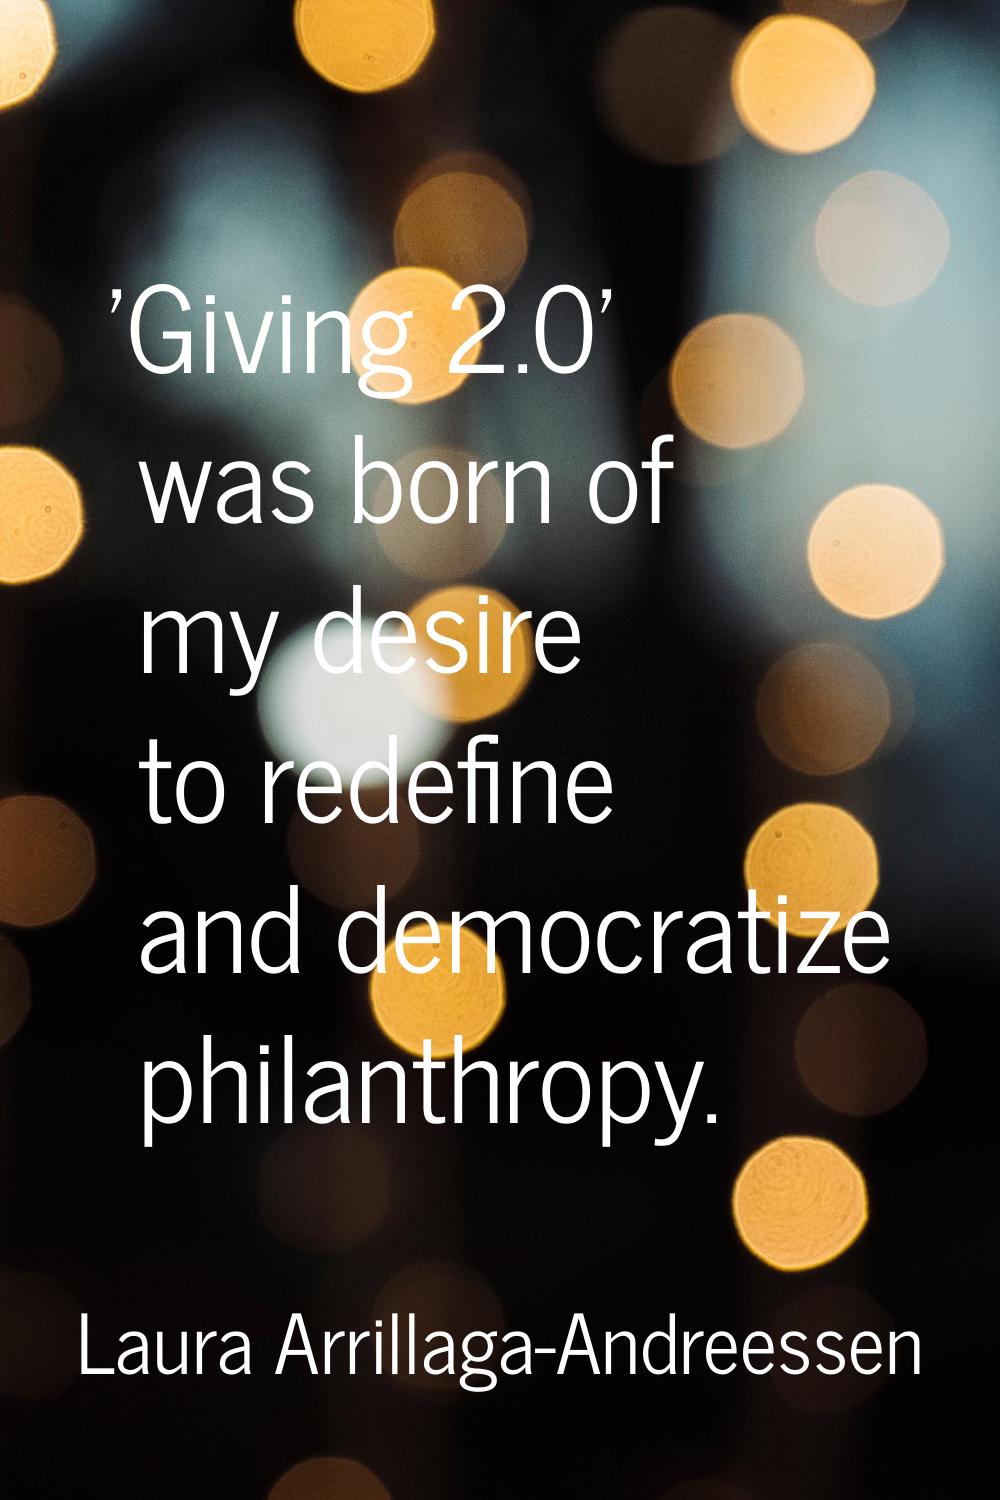 'Giving 2.0' was born of my desire to redefine and democratize philanthropy.